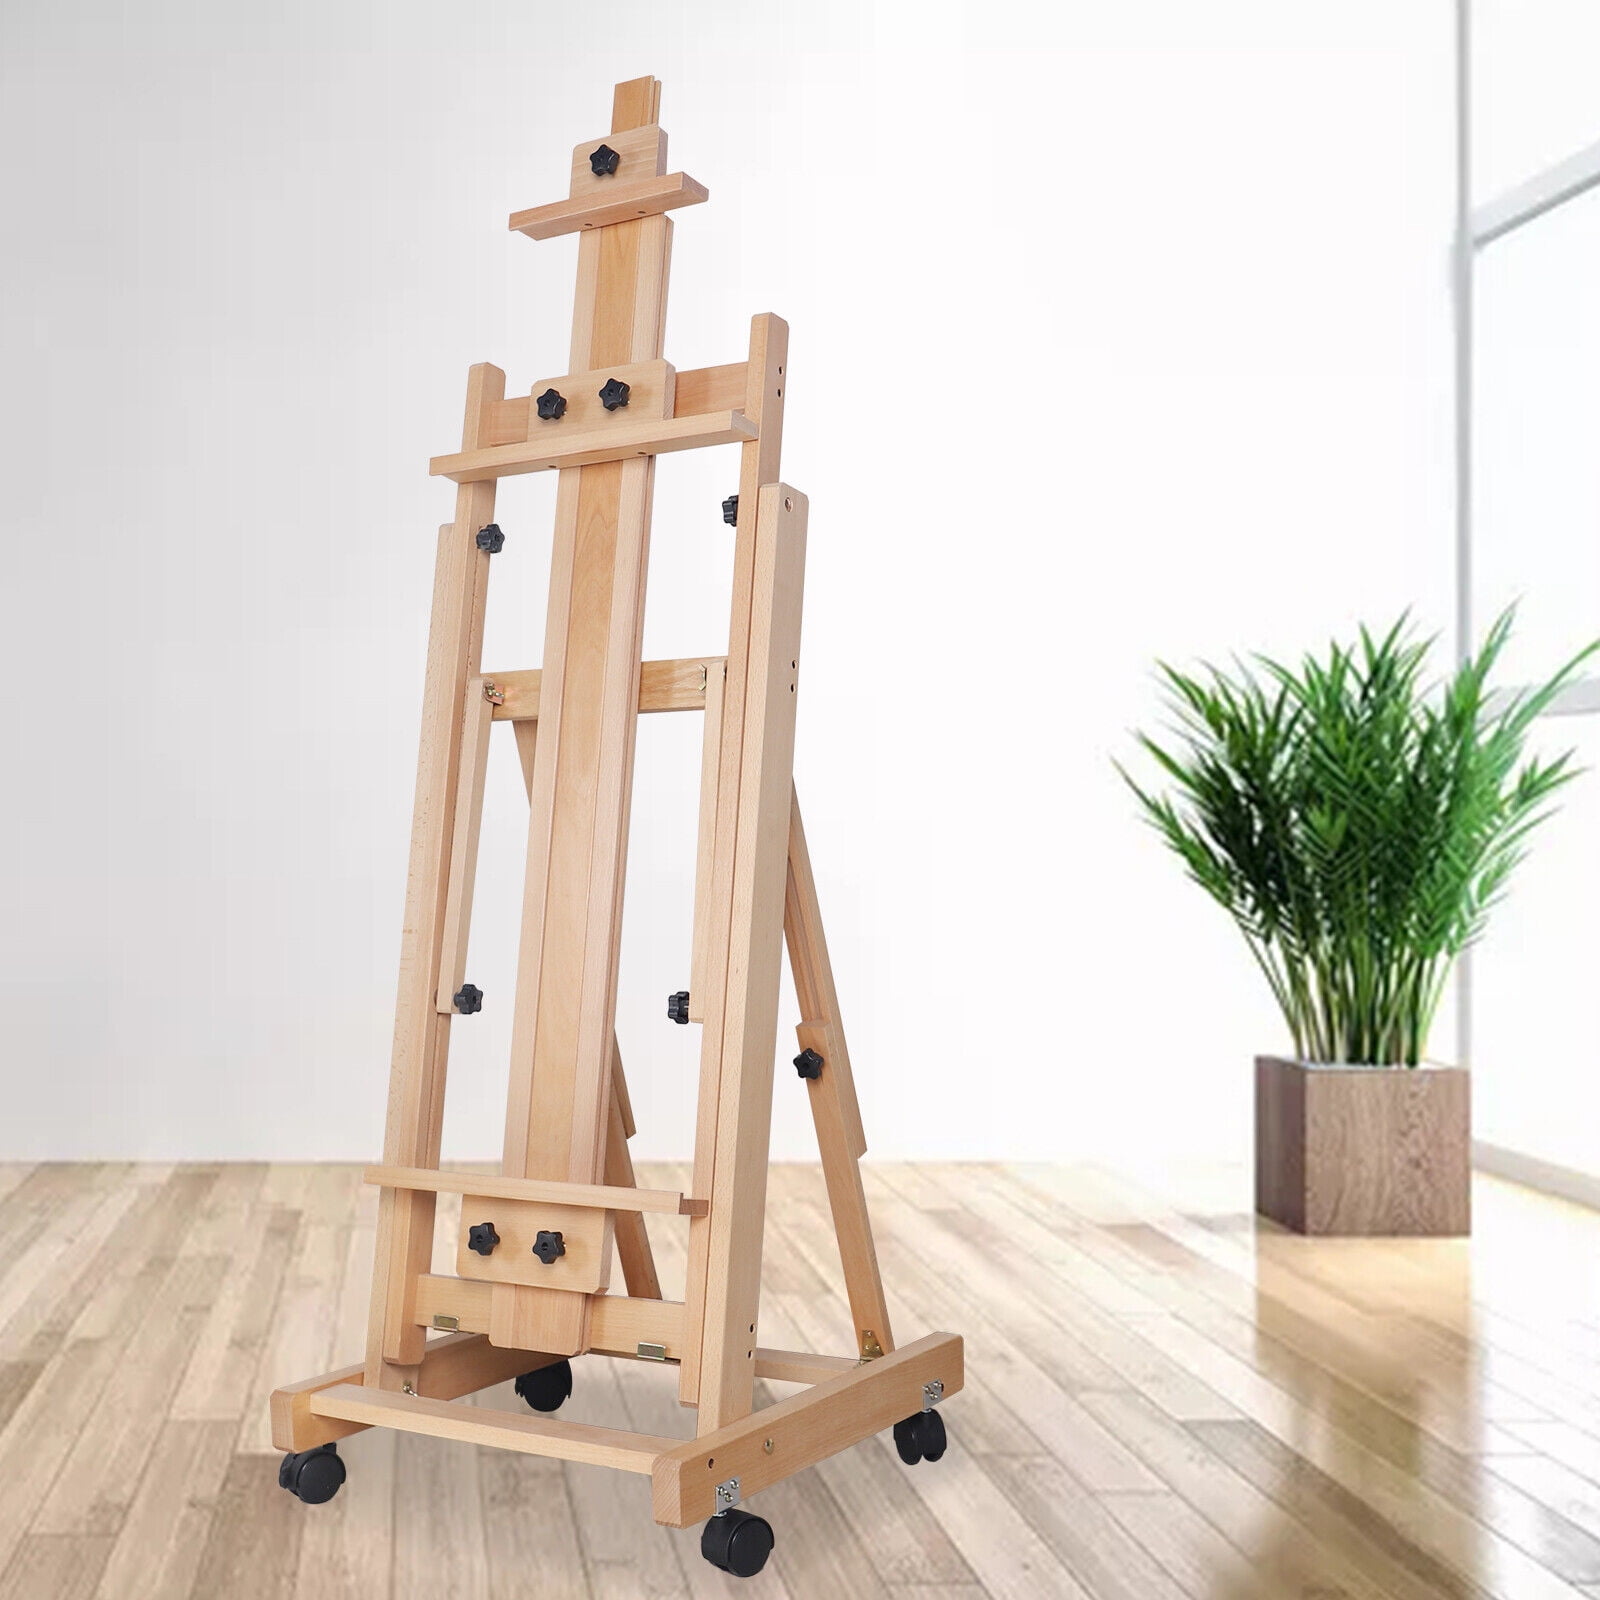 Deluxe heavy duty studio easel Large size. Beech wood with deluxe quality  lacquer